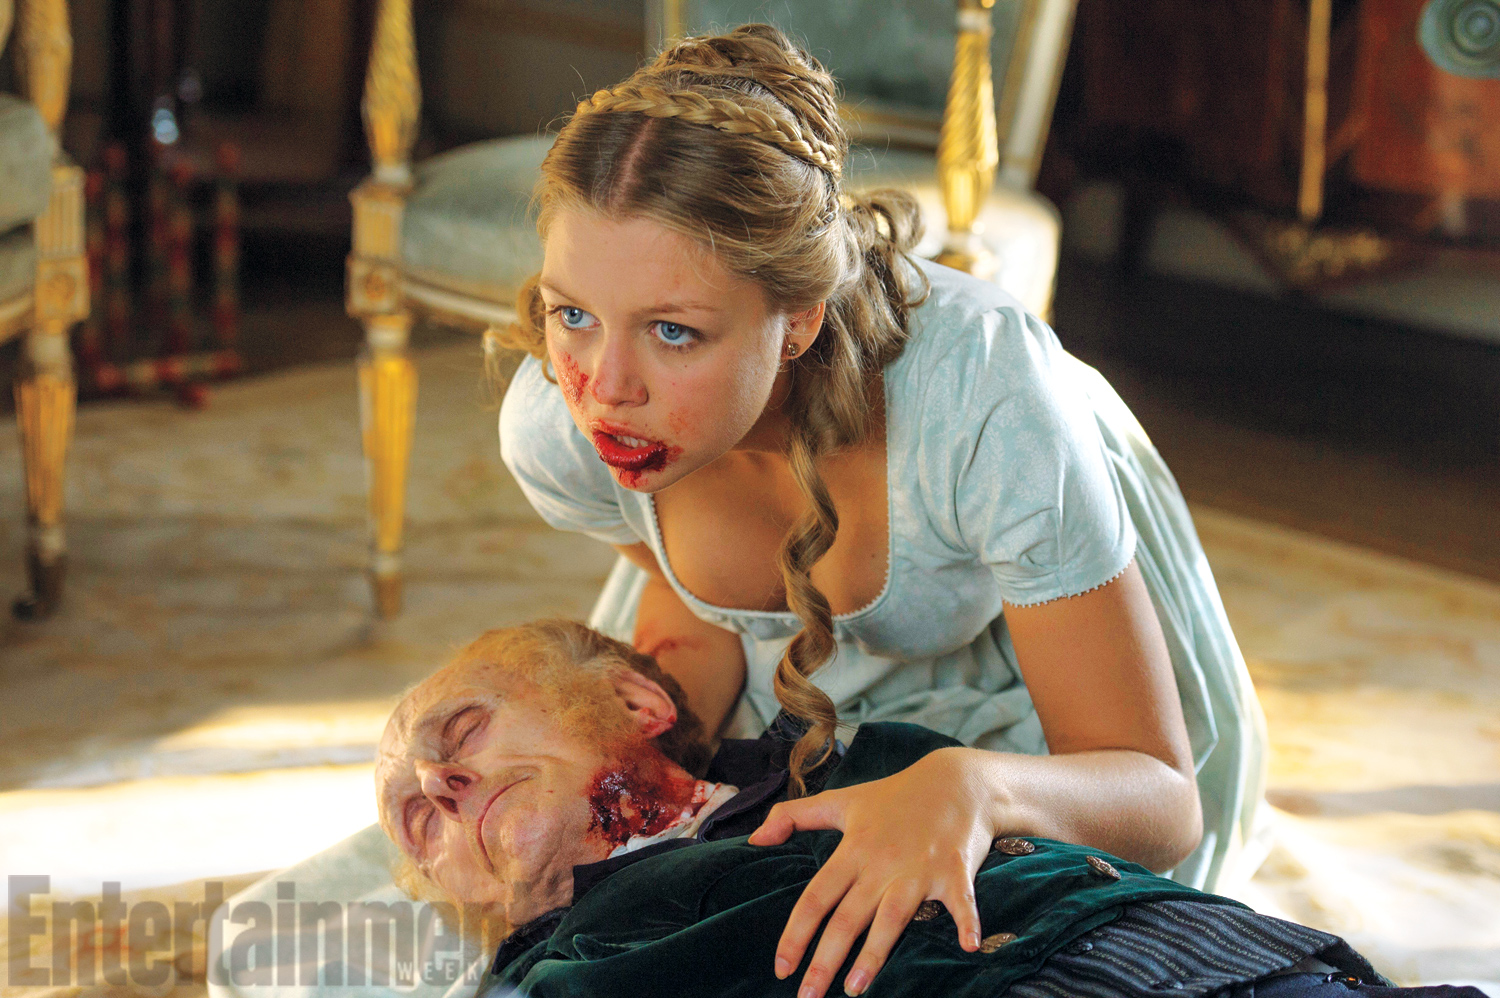 1017-1371-1372-ppz-pride-and-prejudice-and-zombies-03a